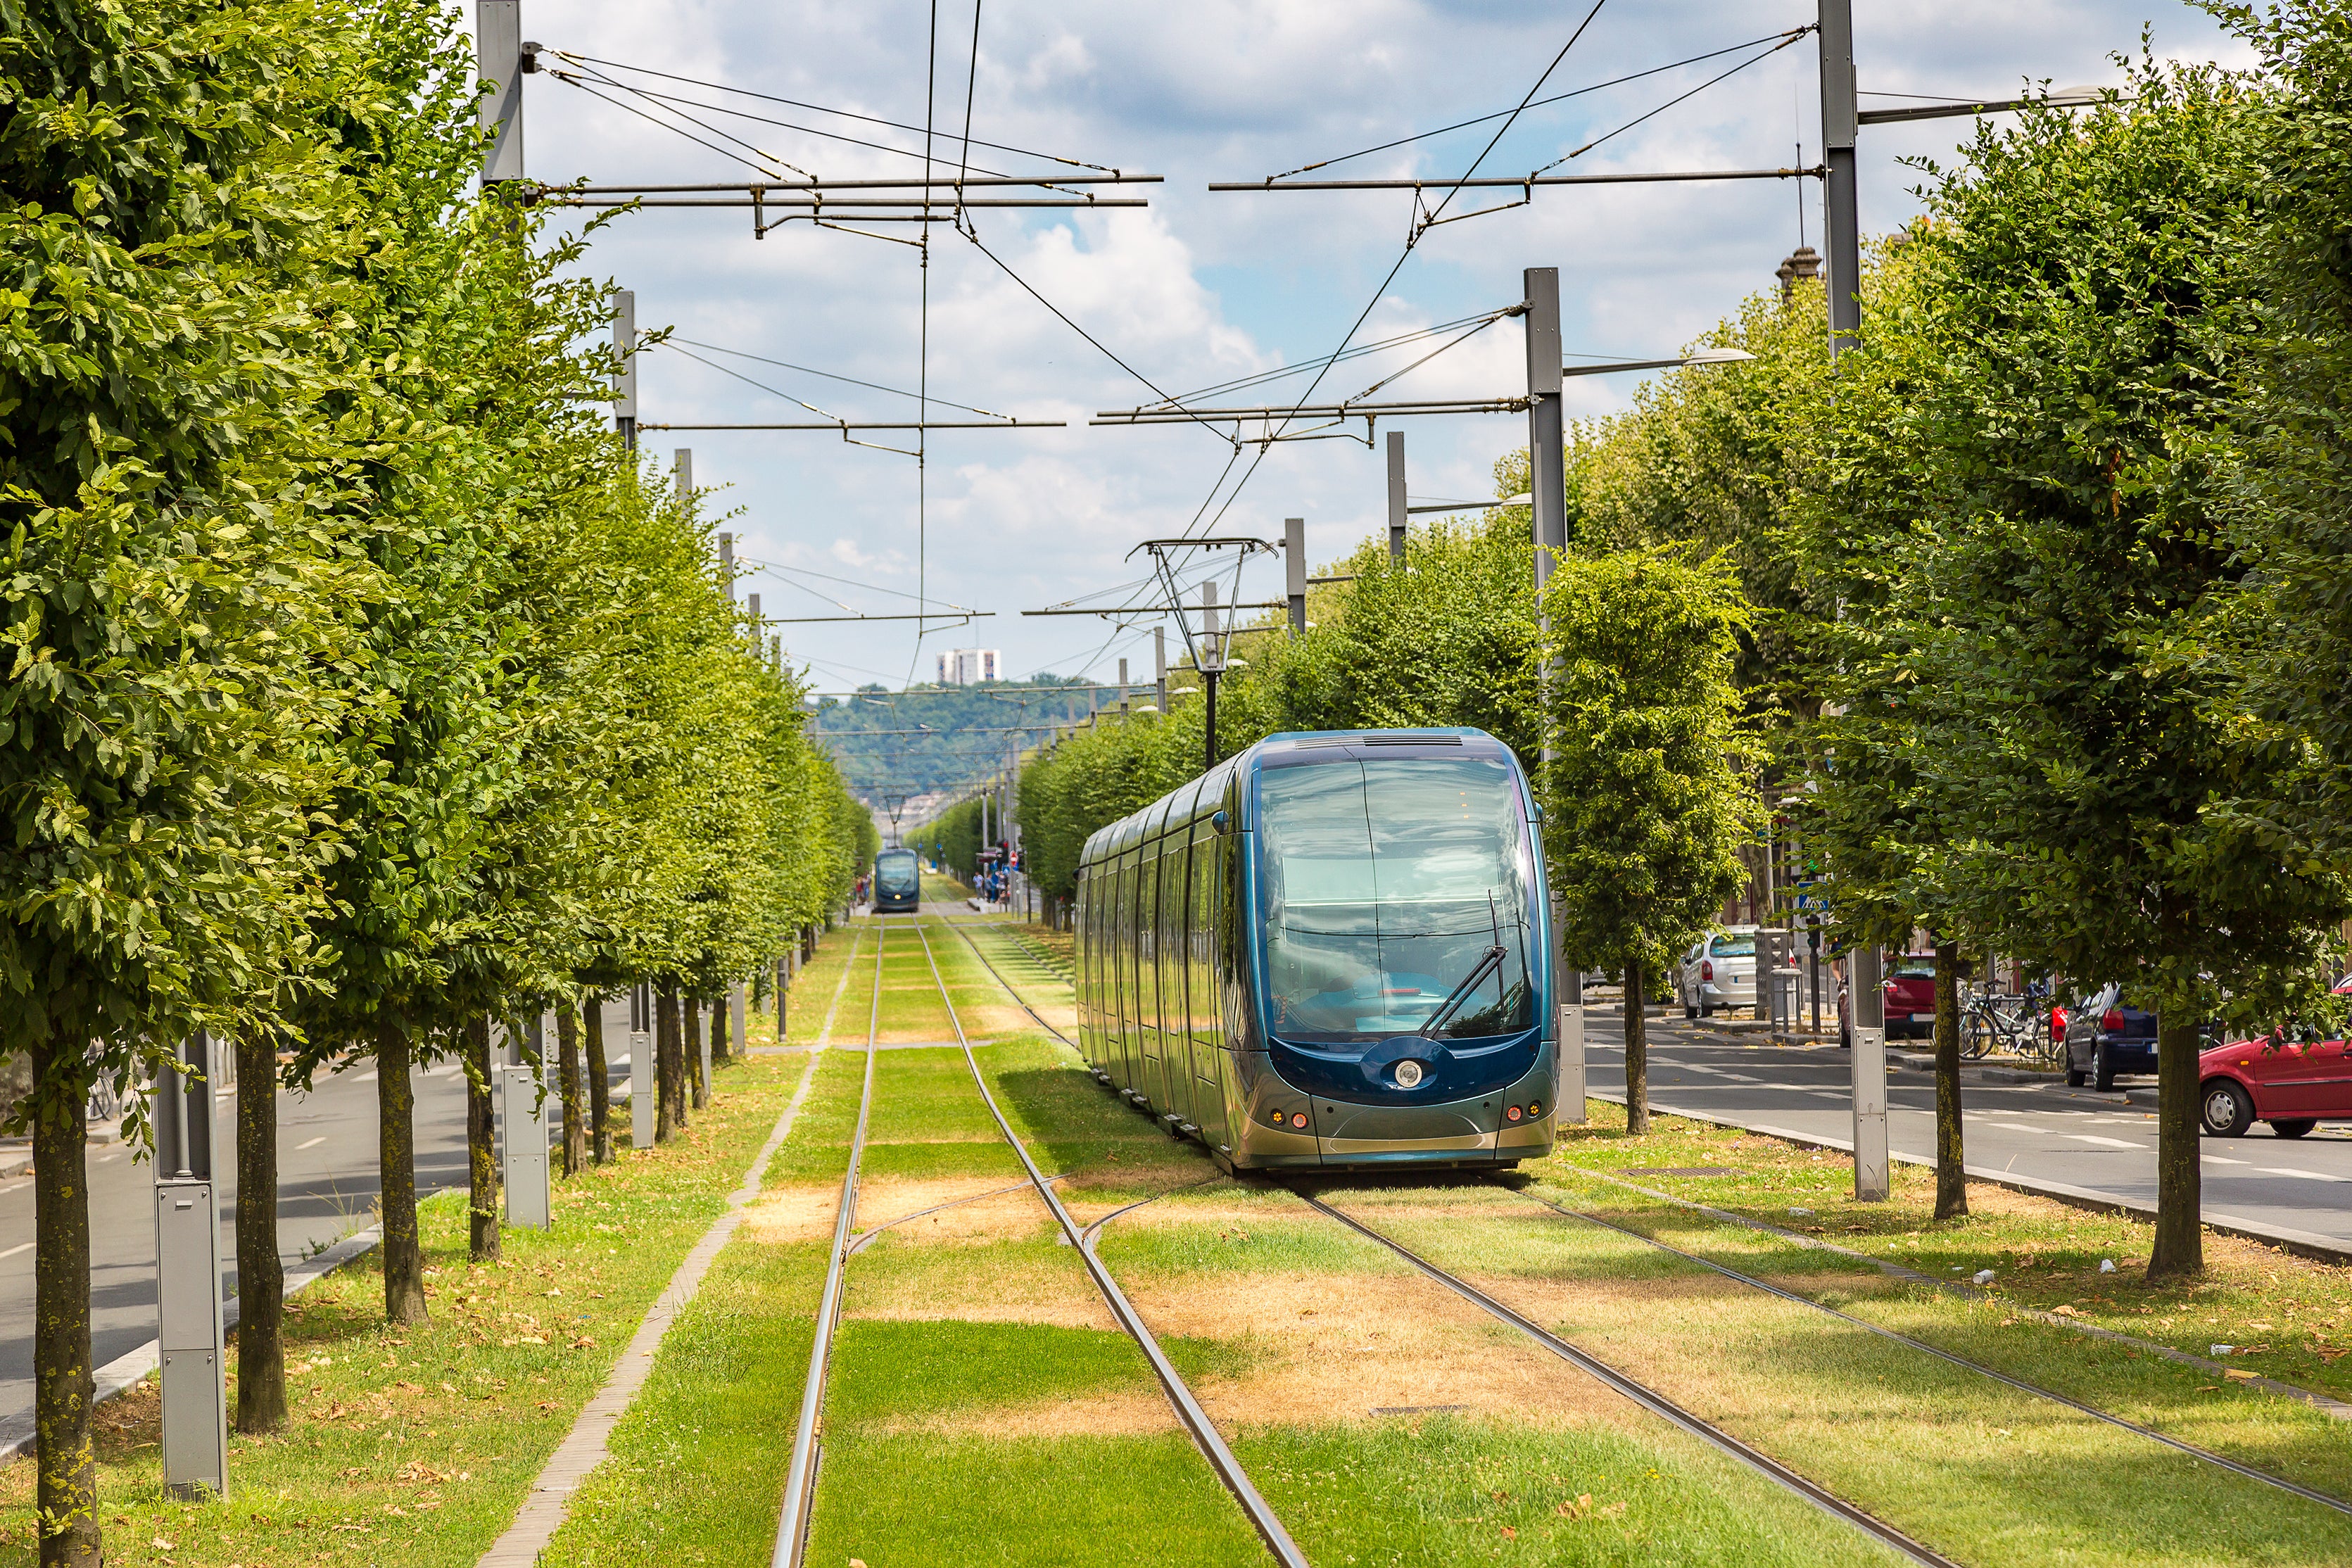 Modern city trams in Bordeaux. France has invested heavily in rapid transit systems in the past 20 years